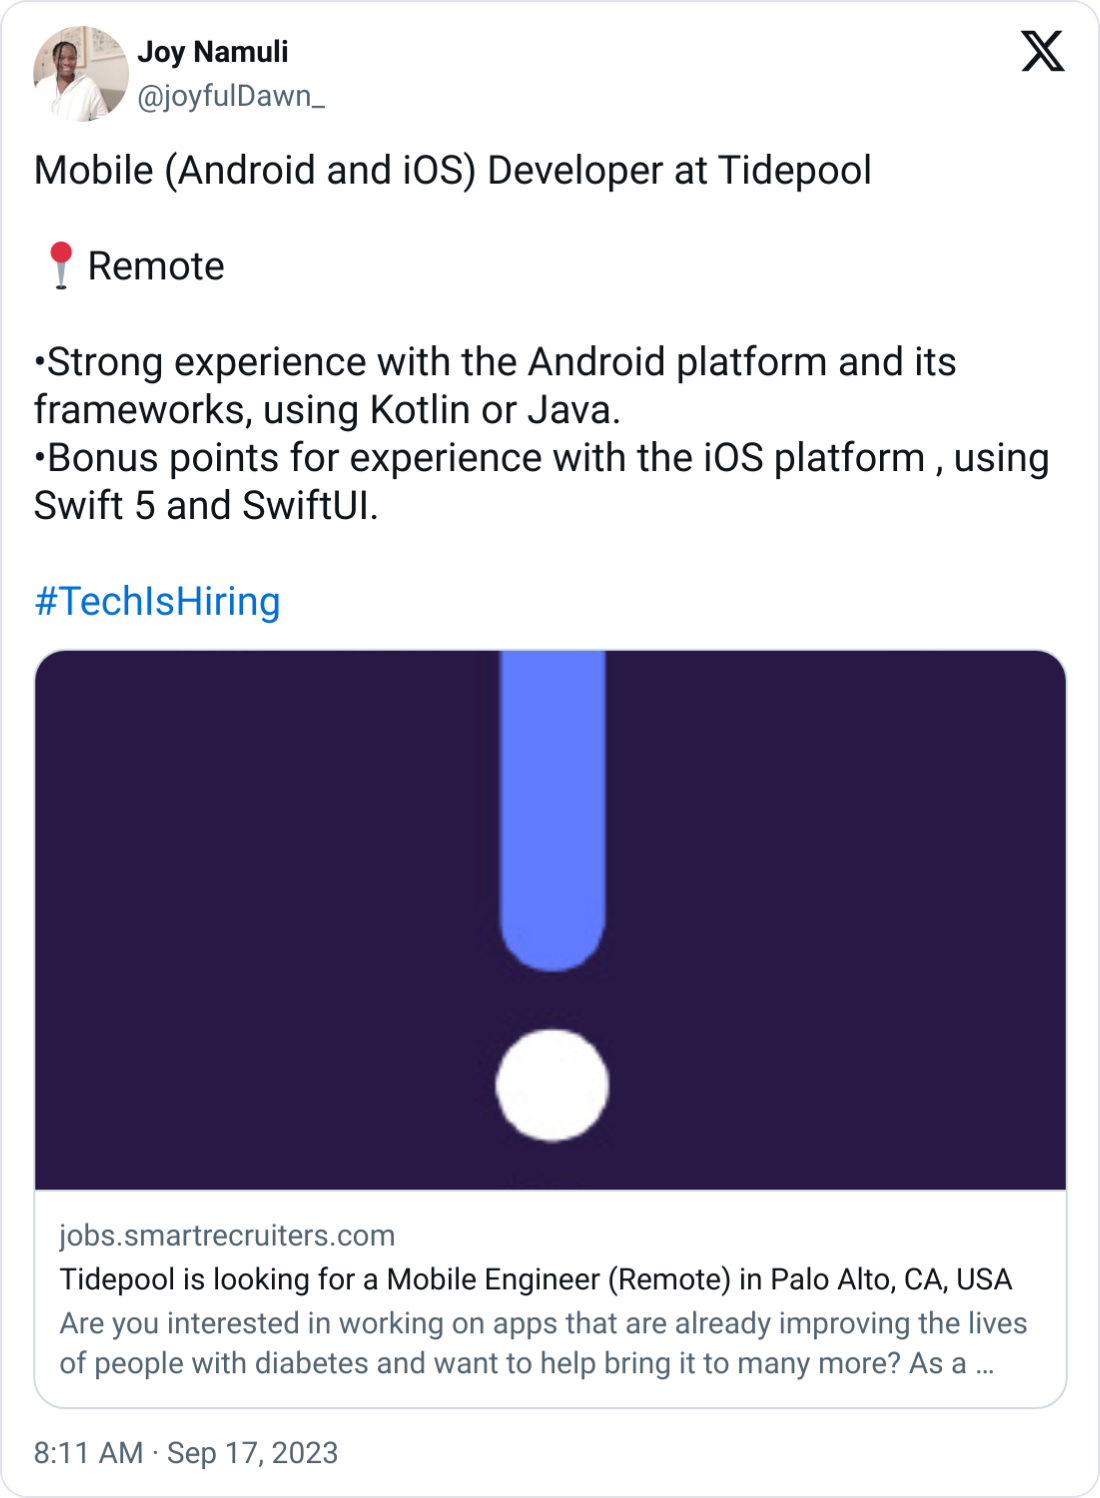 Joy Namuli @joyfulDawn_ Mobile (Android and iOS) Developer at Tidepool  📍Remote   •Strong experience with the Android platform and its frameworks, using Kotlin or Java. •Bonus points for experience with the iOS platform , using Swift 5 and SwiftUI.  #TechIsHiring